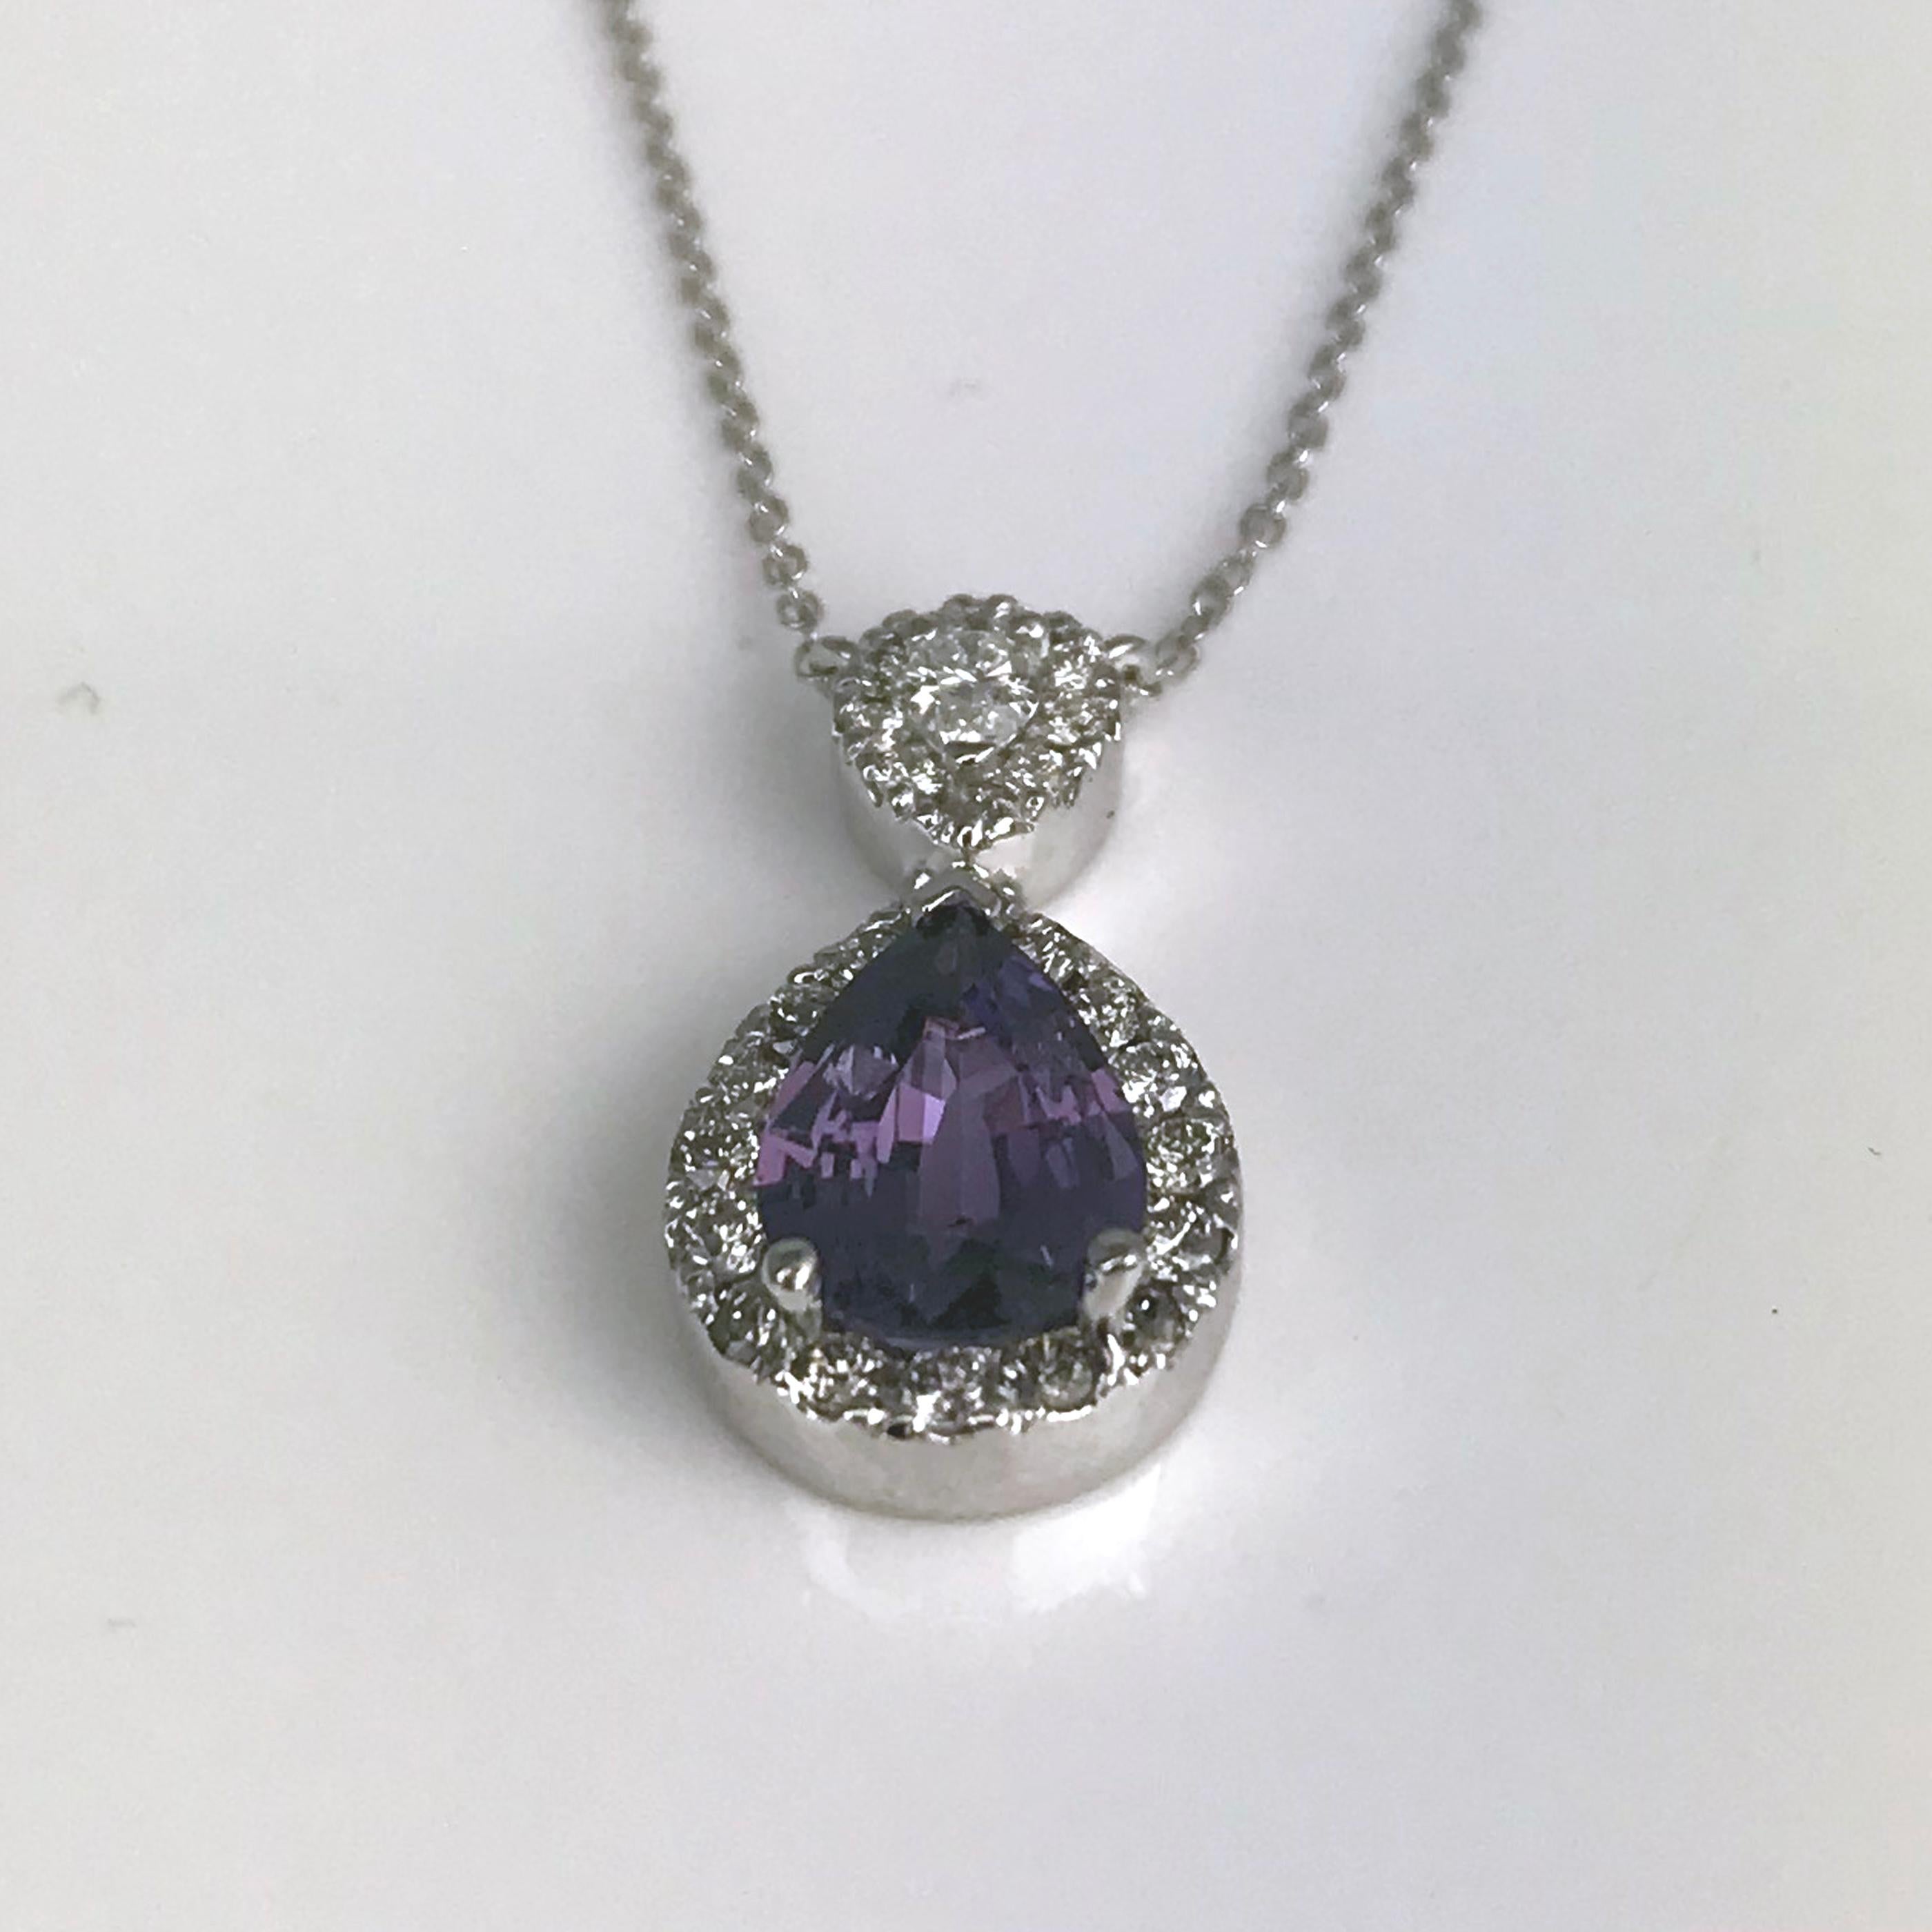 This pendant has a 1.49 carat pear shape Lavender Sapphire center, surrounded by a halo of round white diamonds. Another pear shape diamond decorates the bail, also in a halo of round diamonds. Total diamond weight 0.42 carats.

Sapphire: 1.49 carat